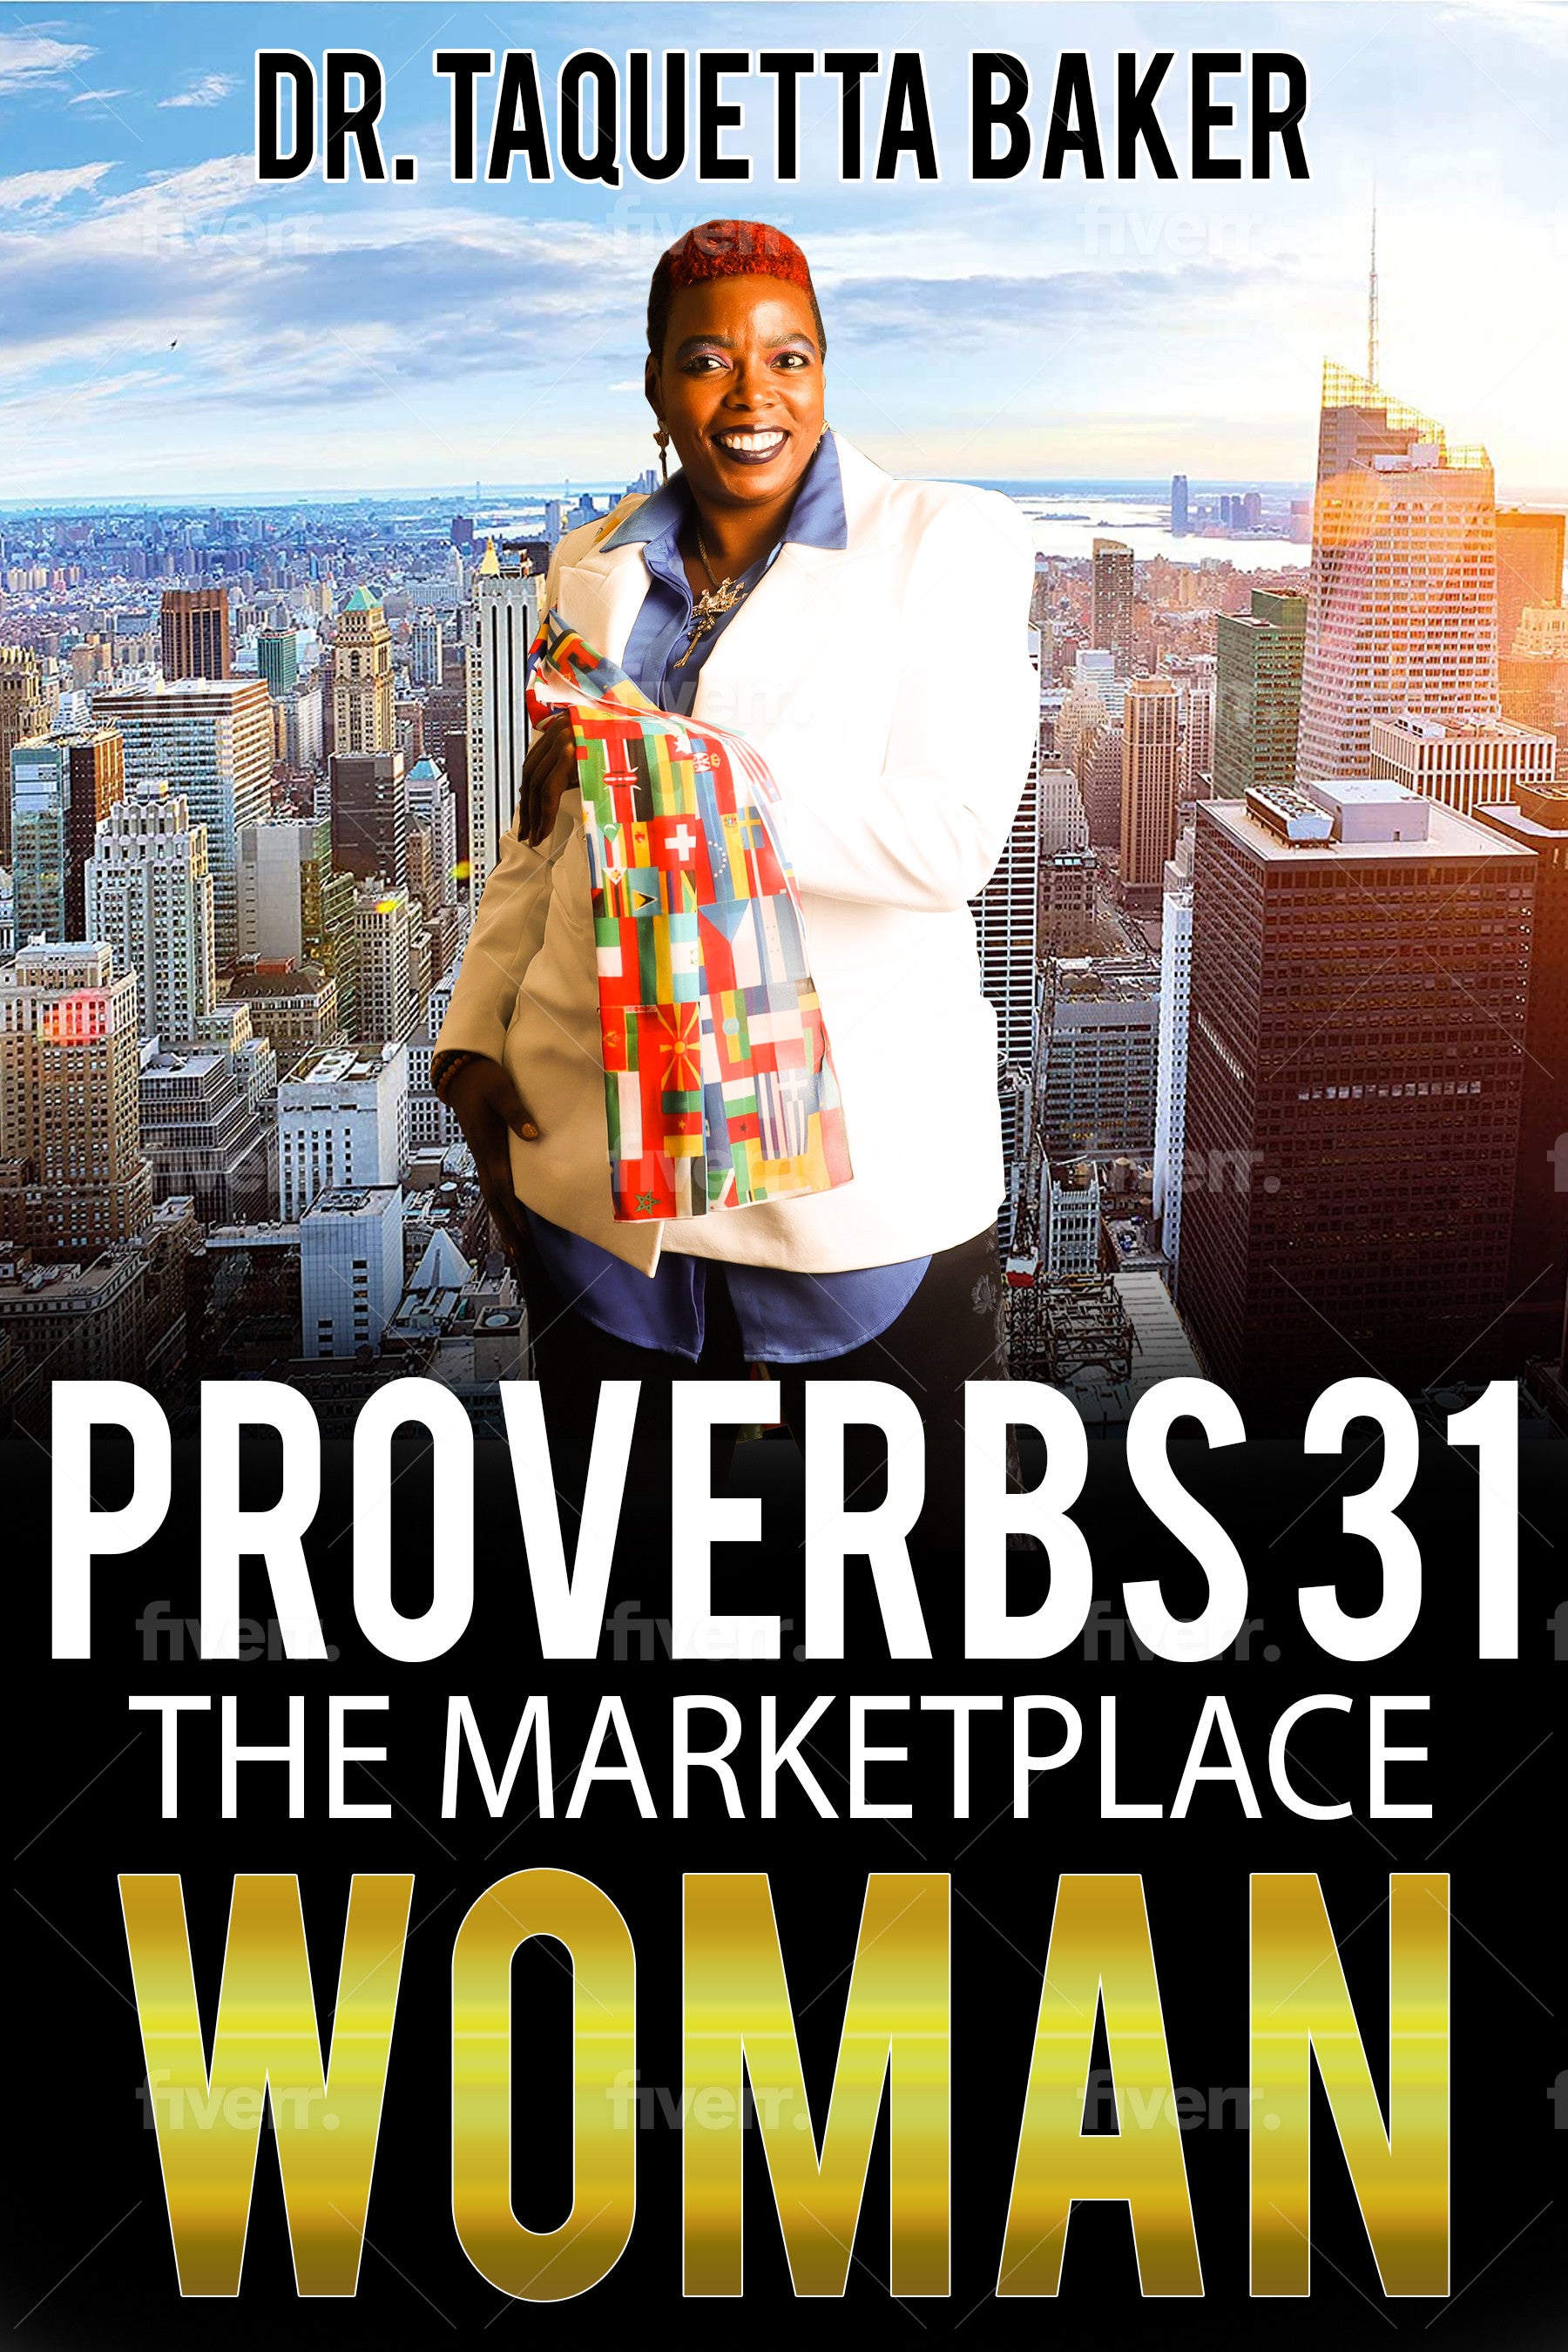 Proverbs 31 The Marketplace Woman